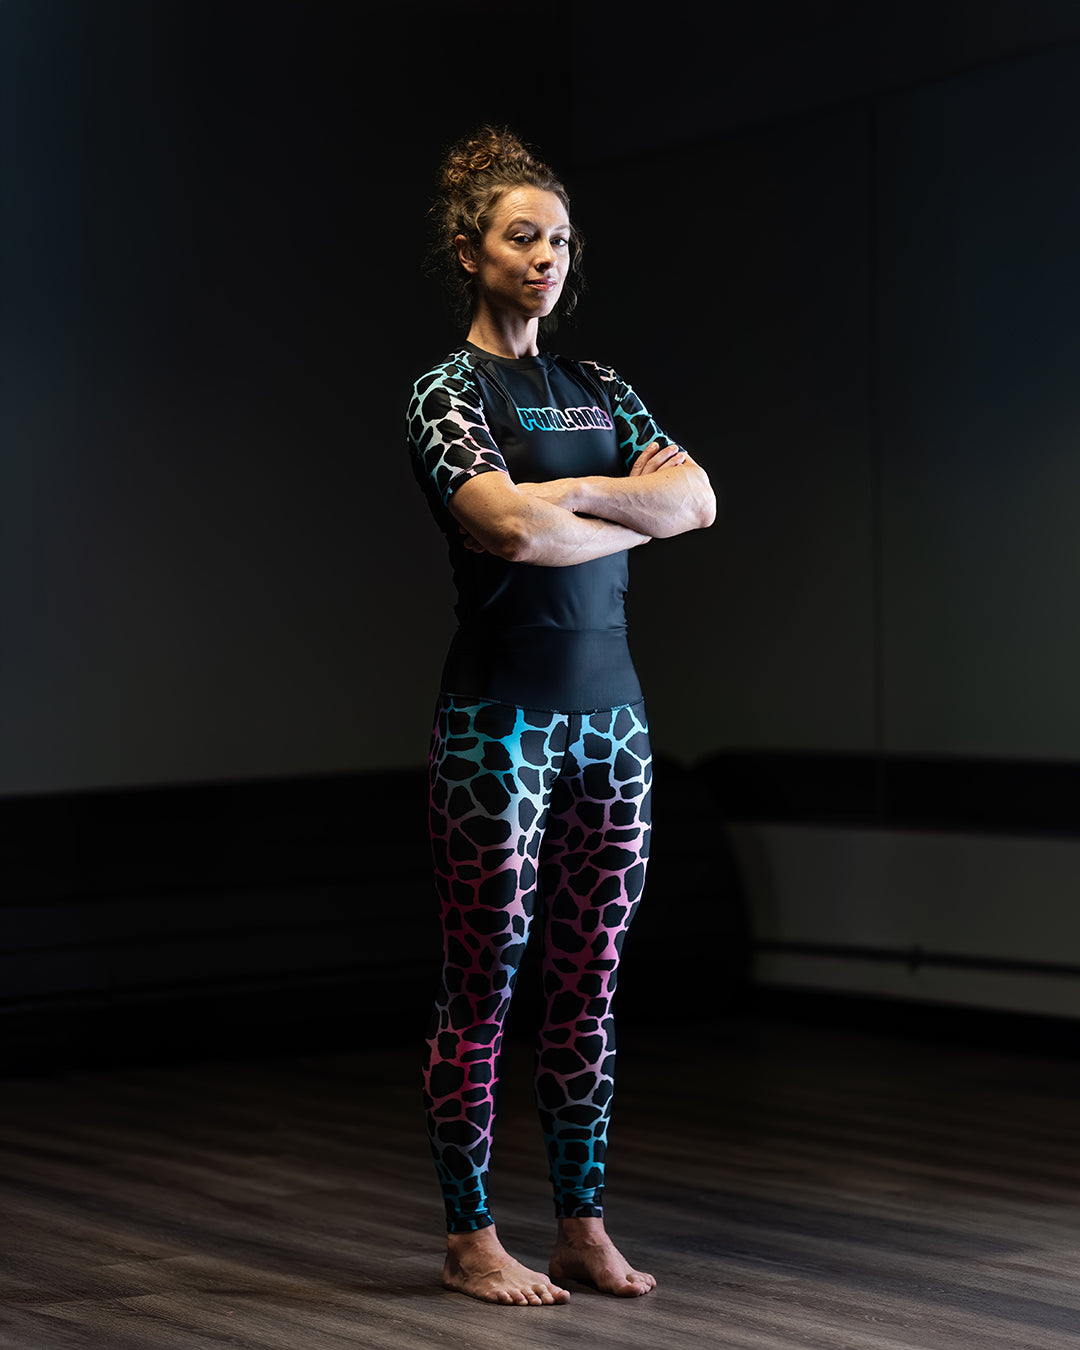 LIONESS WOMEN'S SPATS – Phalanx Formations